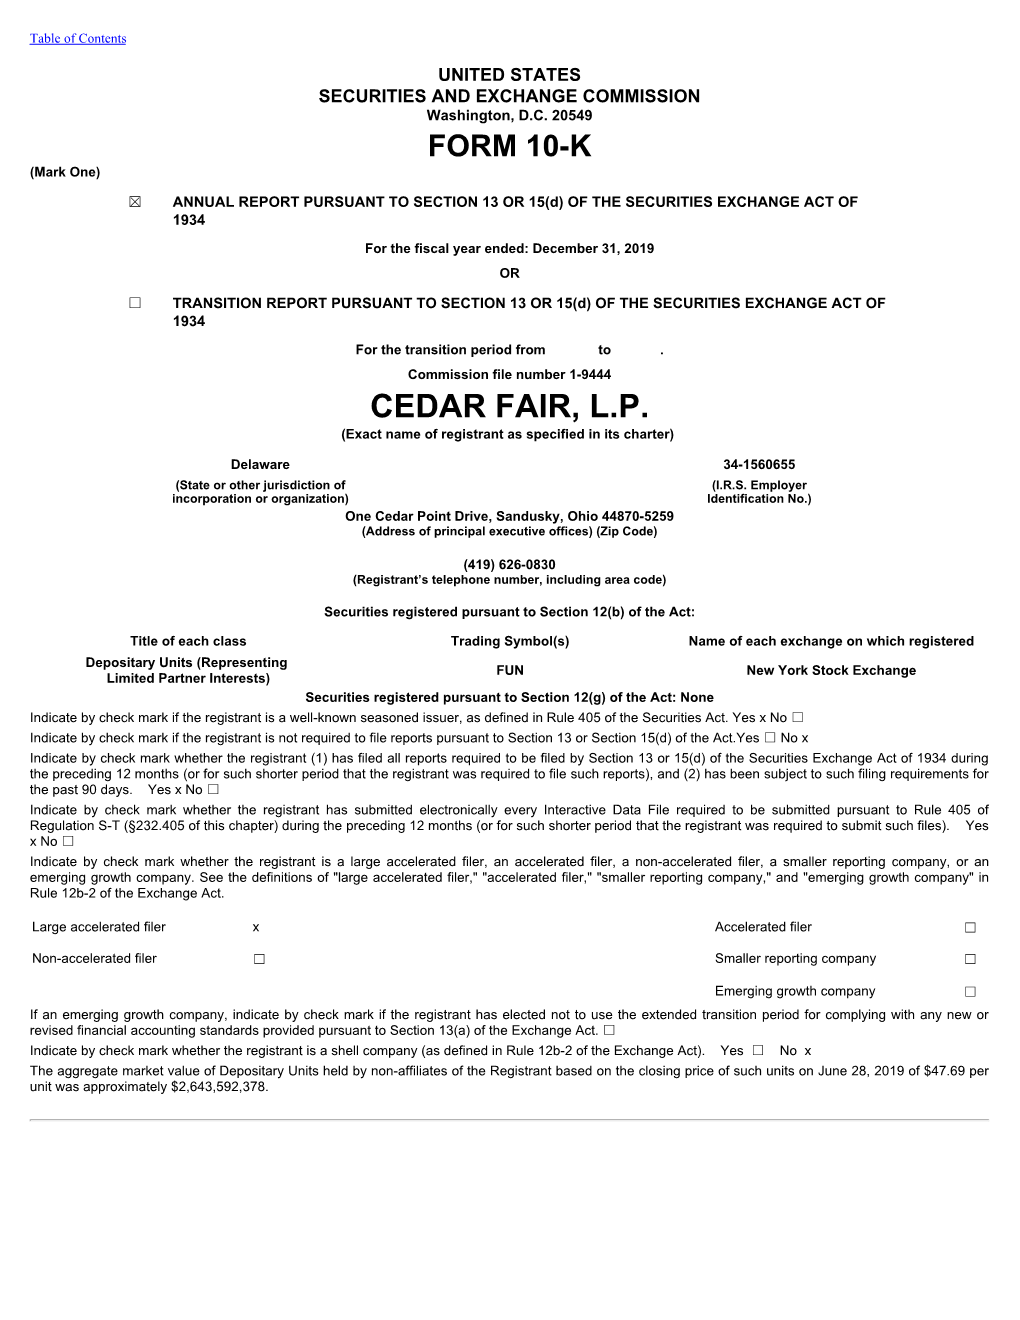 CEDAR FAIR, L.P. (Exact Name of Registrant As Specified in Its Charter)